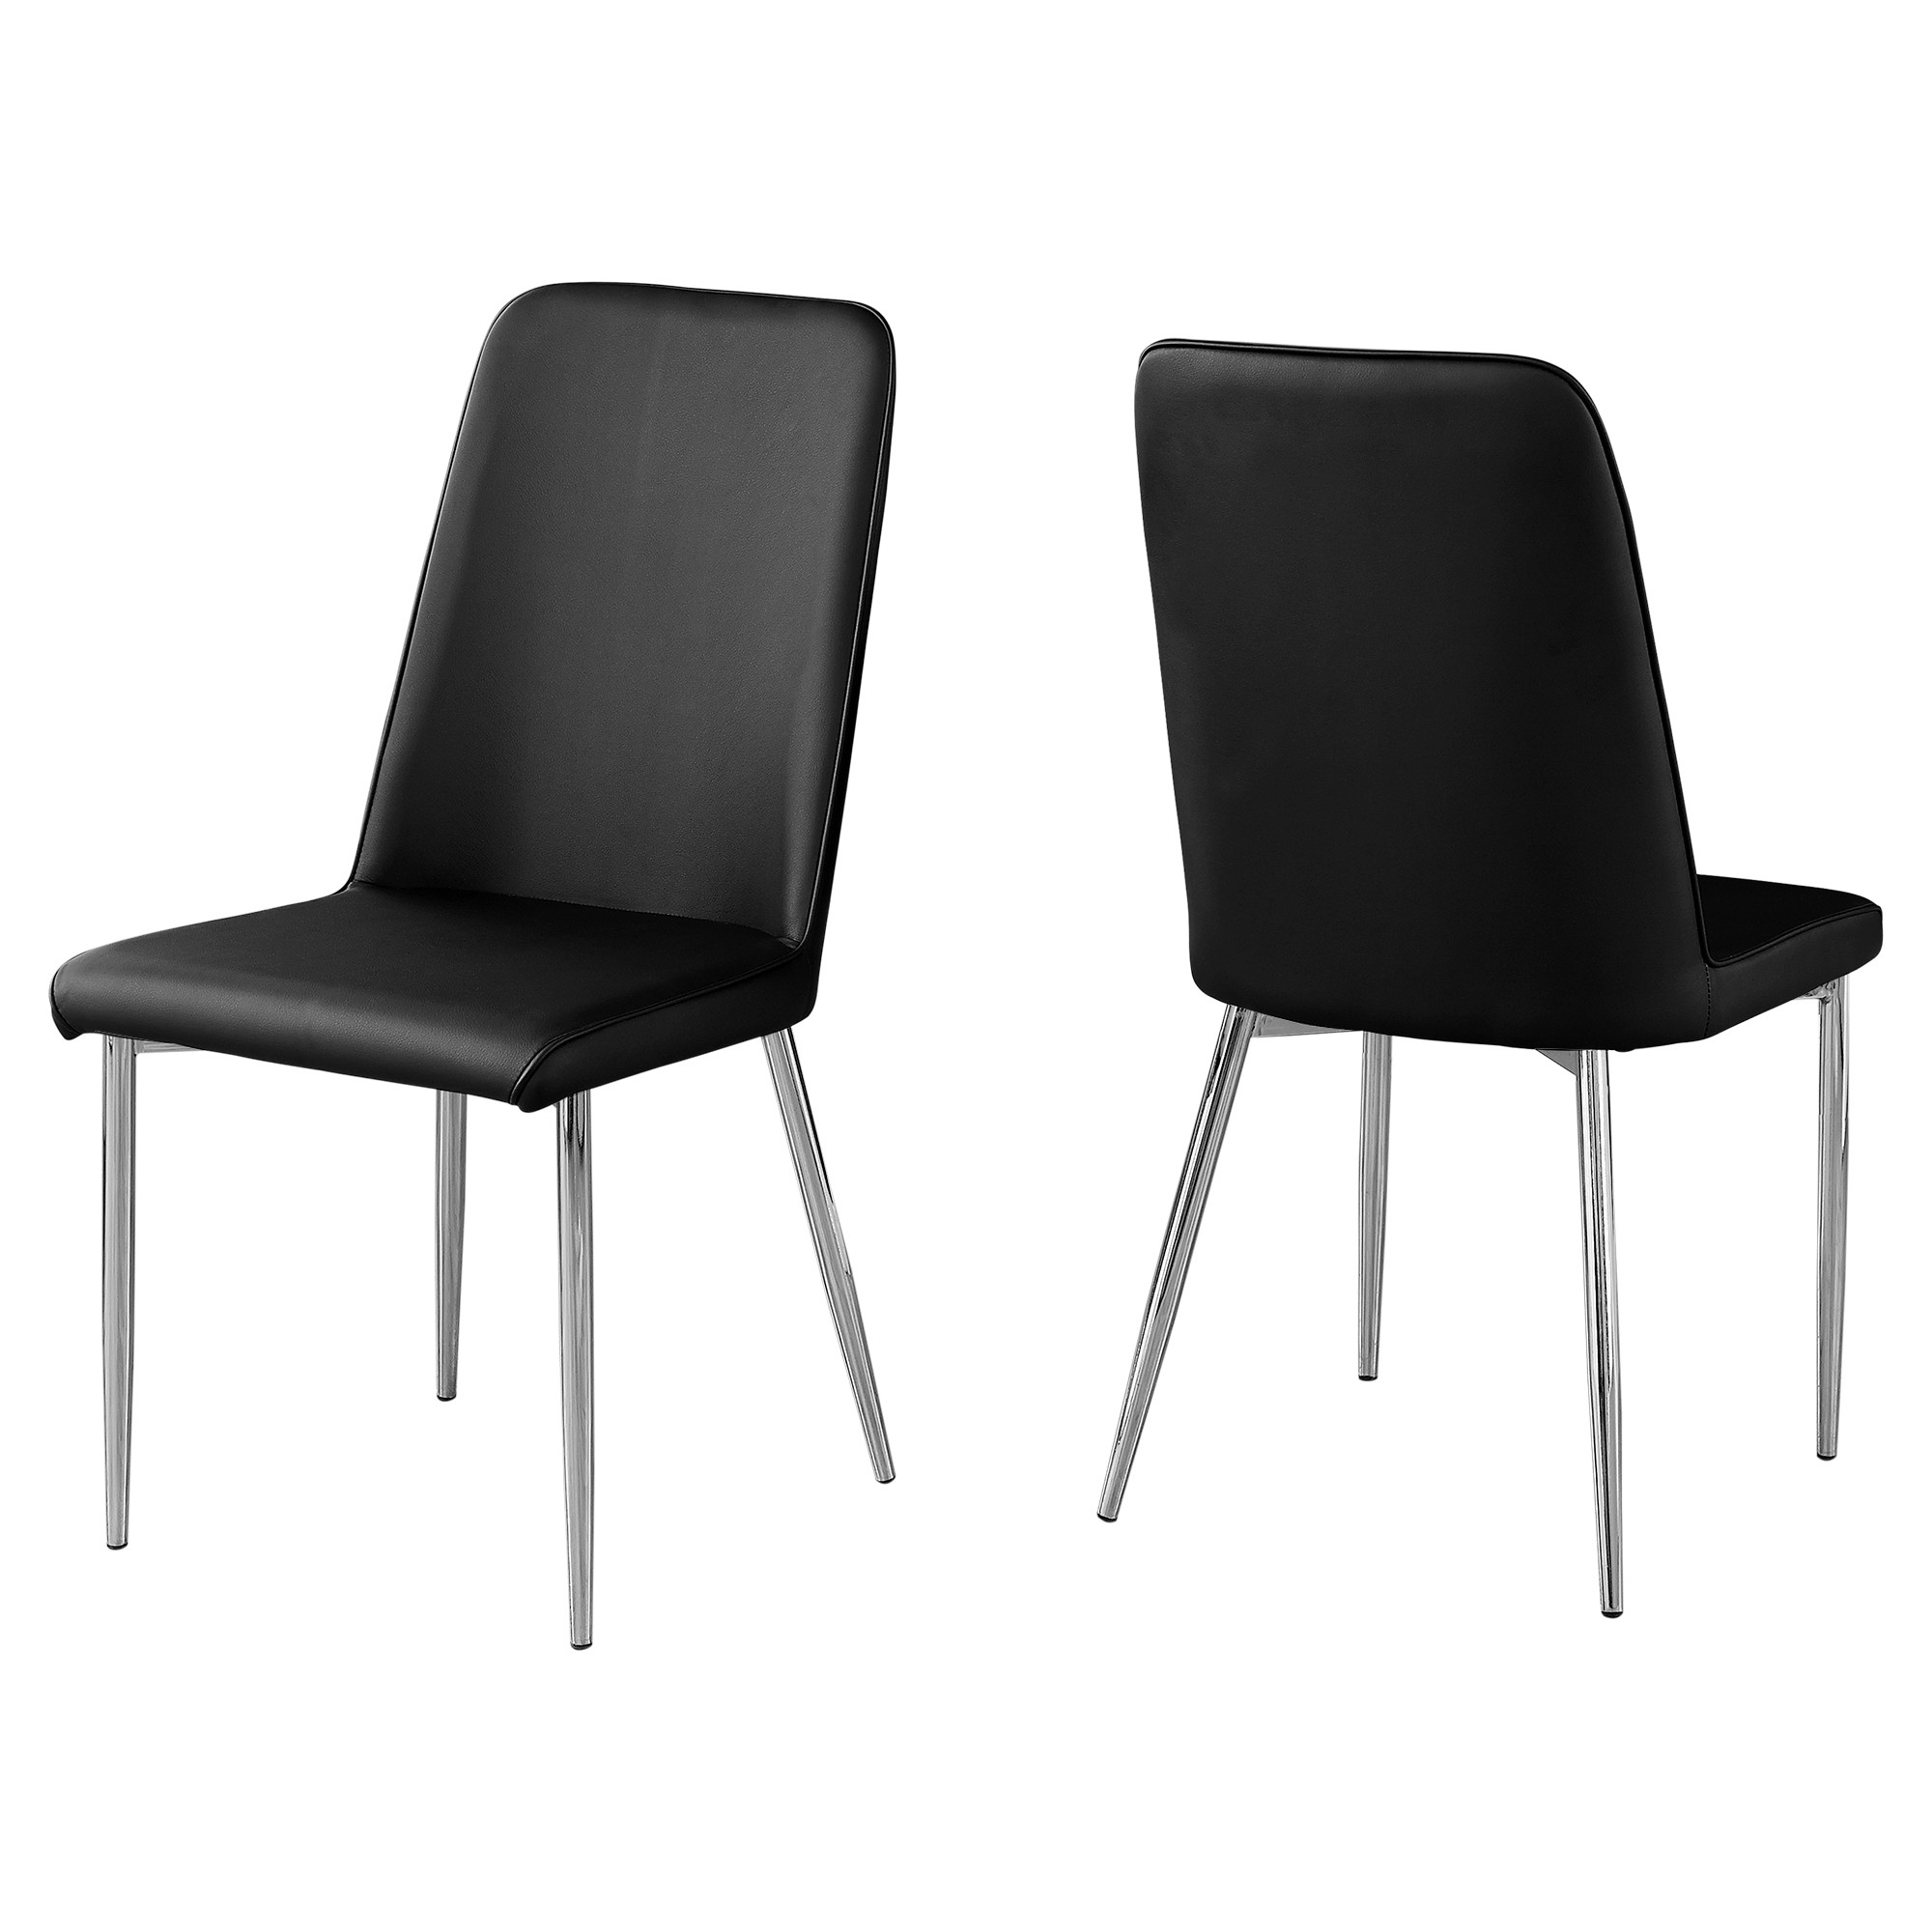 DINING CHAIR - 2PCS / 37"H / BLACK LEATHER-LOOK / CHROME